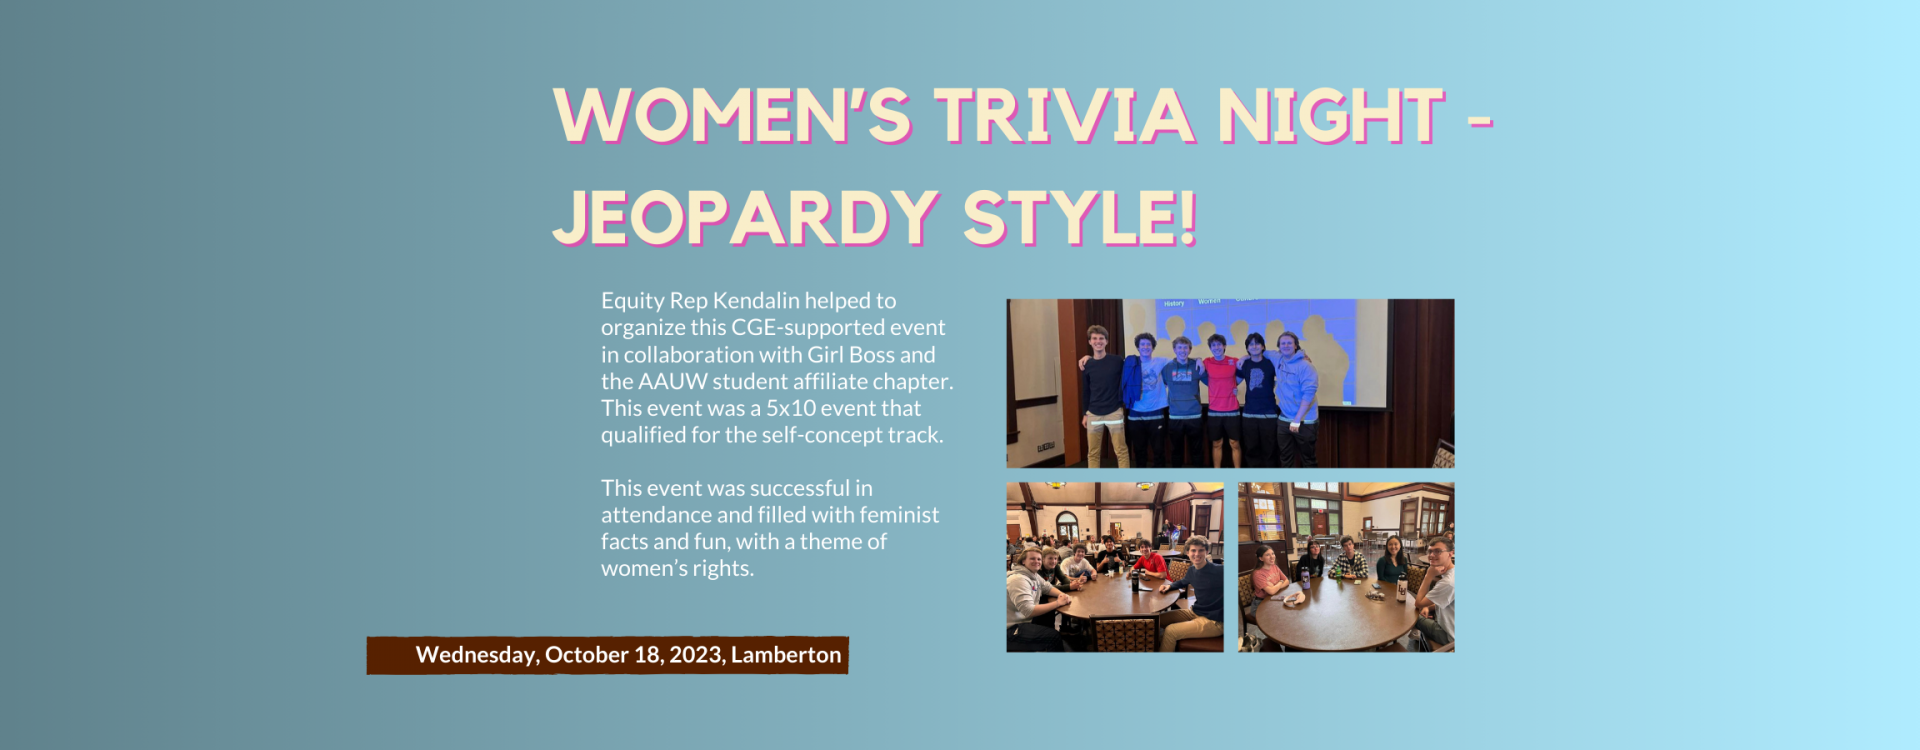 Women’s Trivia Night - Jeopardy Style!: Equity Rep Kendalin helped to organize this CGE-supported event in collaboration with Girl Boss and the AAUW student affiliate chapter.  This event was a 5x10 event that qualified for the self-concept track.   This event was successful in attendance and filled with feminist facts and fun, with a theme of women’s rights.